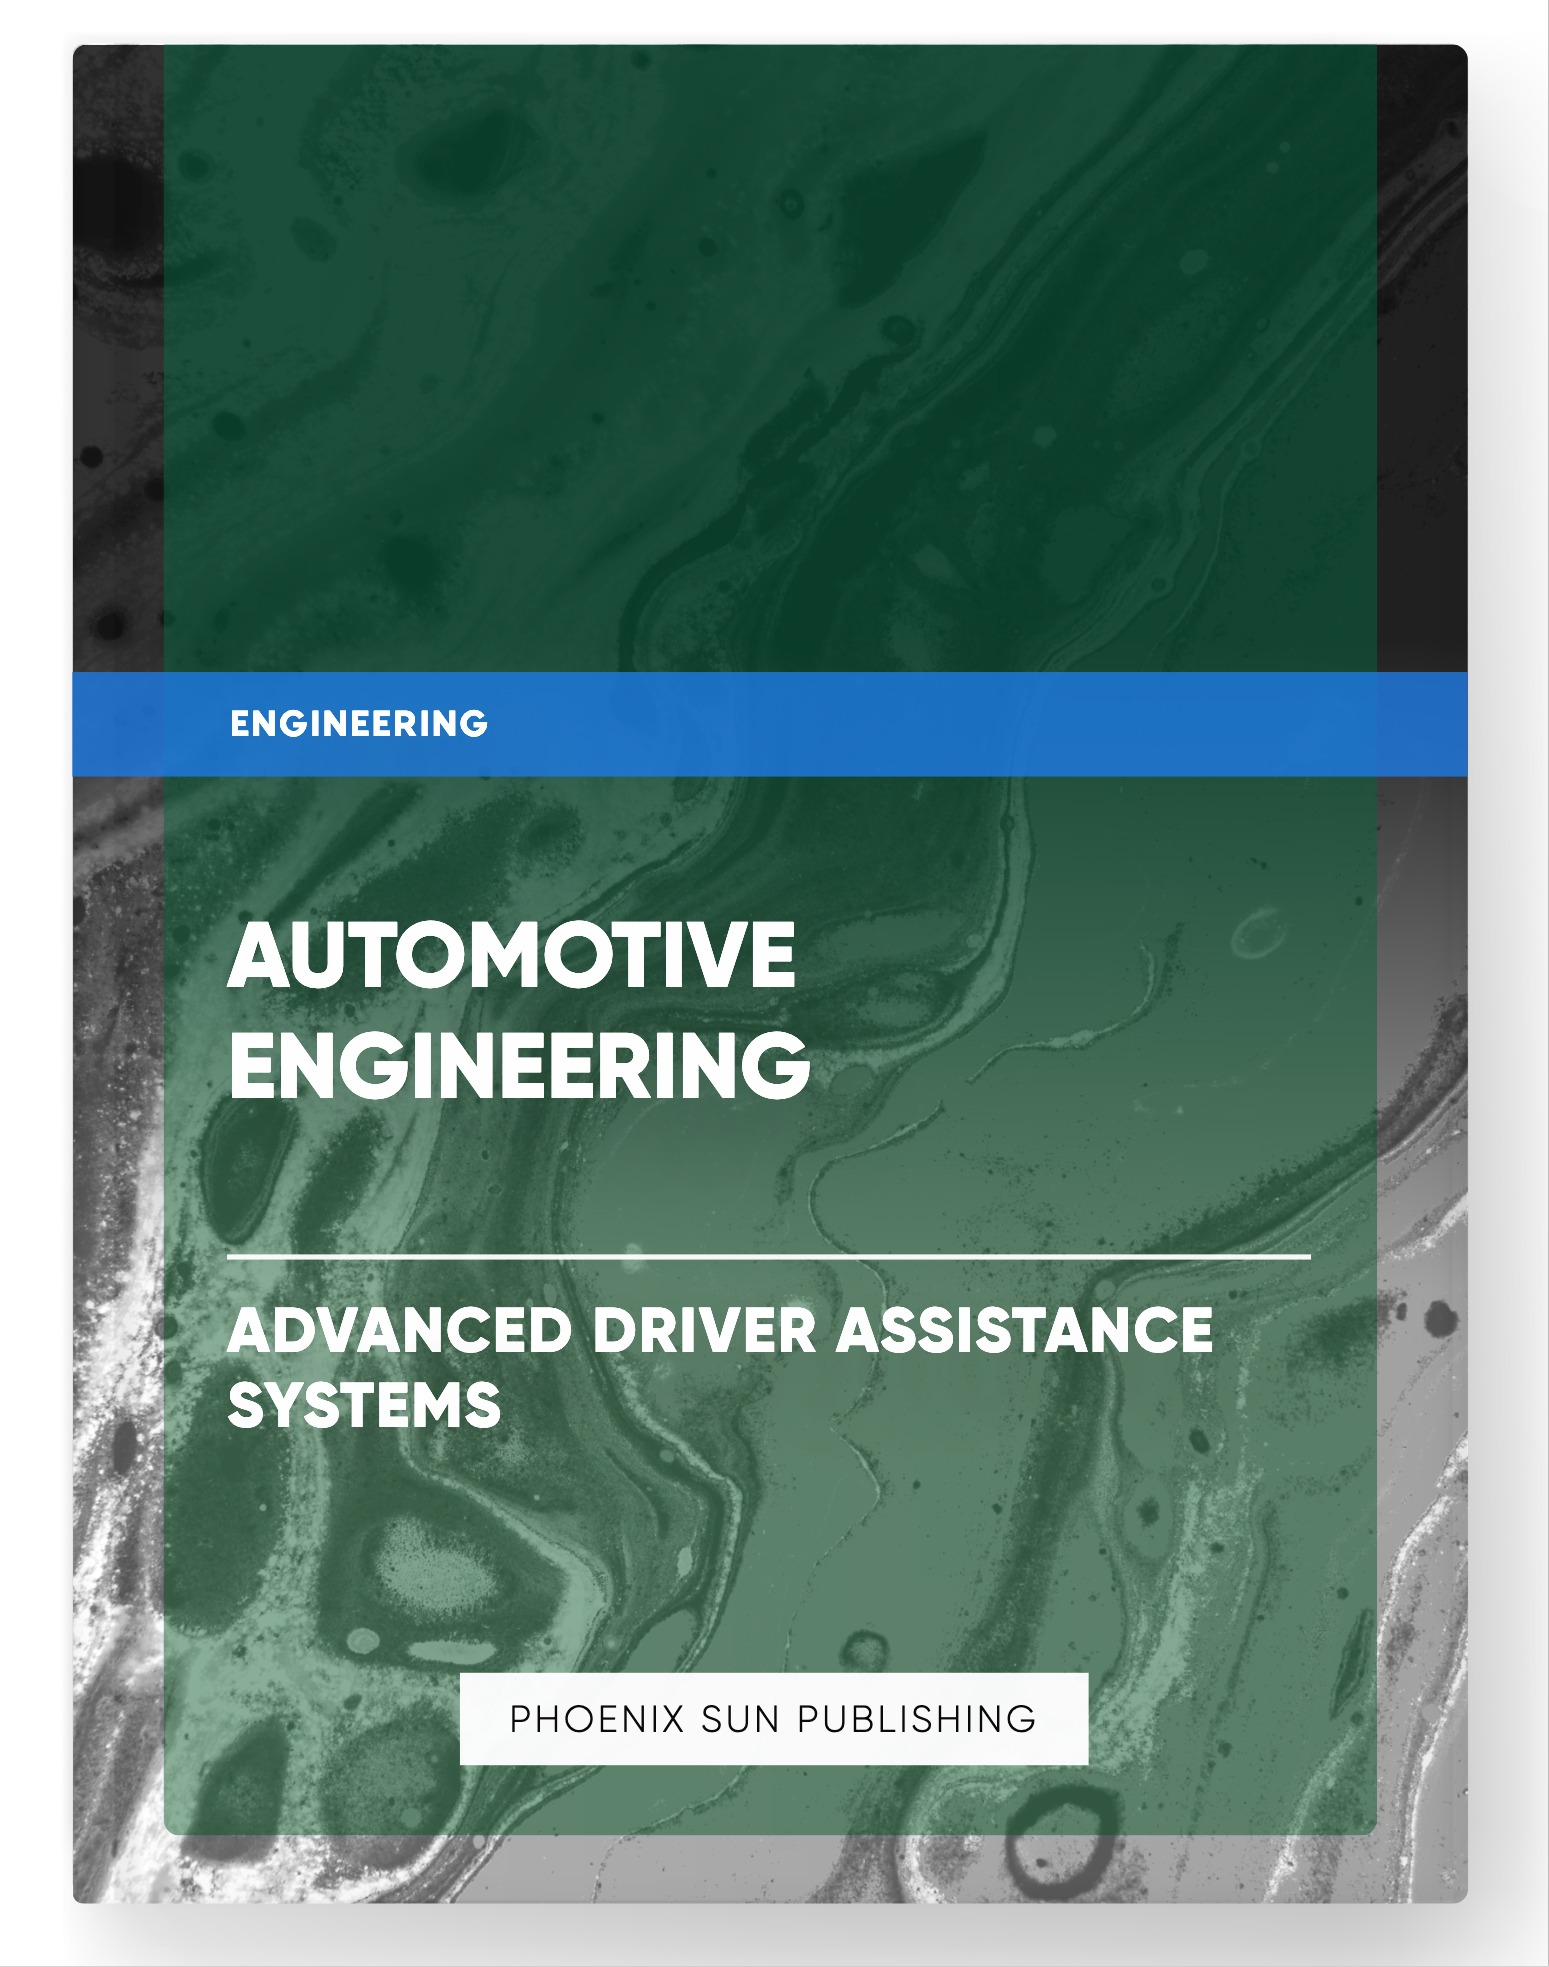 Automotive Engineering – Advanced Driver Assistance Systems